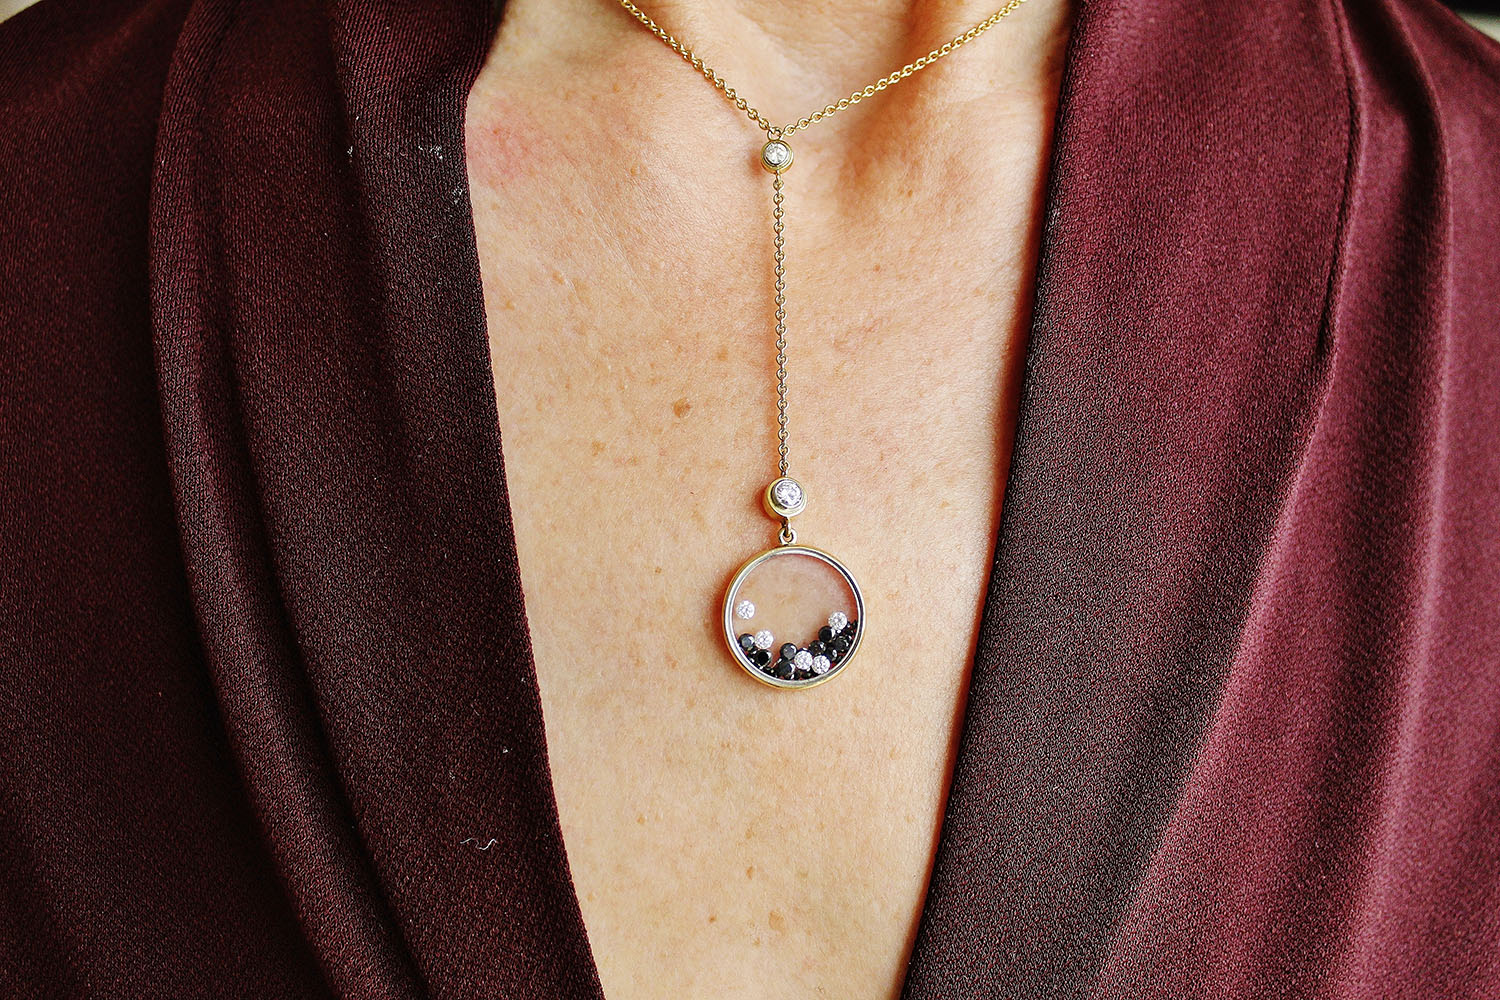 My wife wearing the pendant